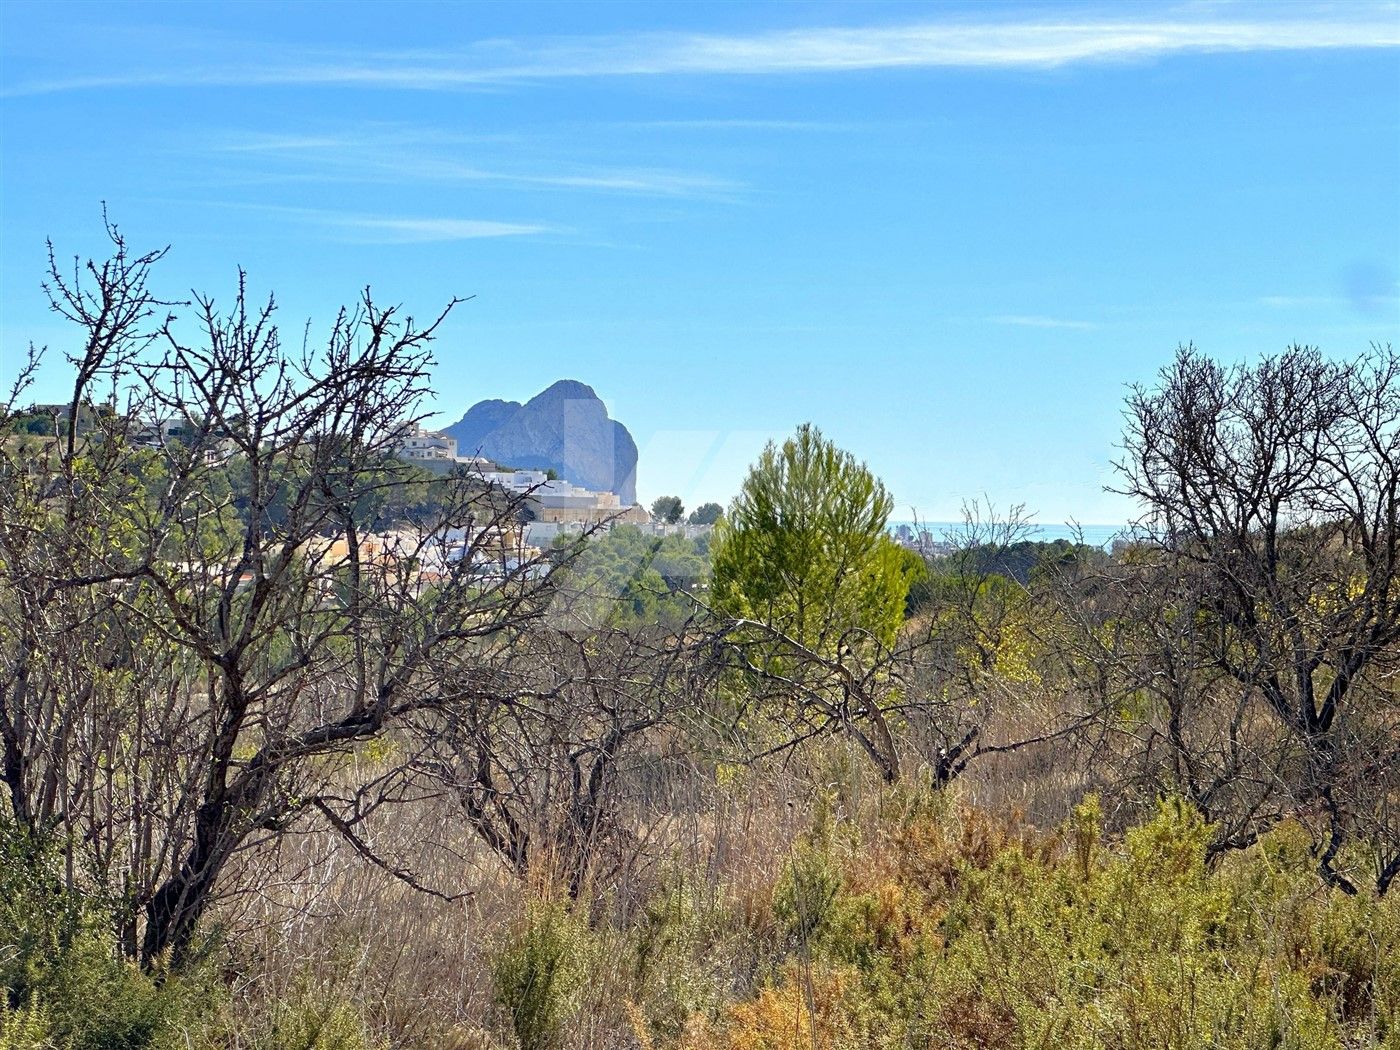 Rustic plot for sale with sea views in Benisa, Costa Blanca.